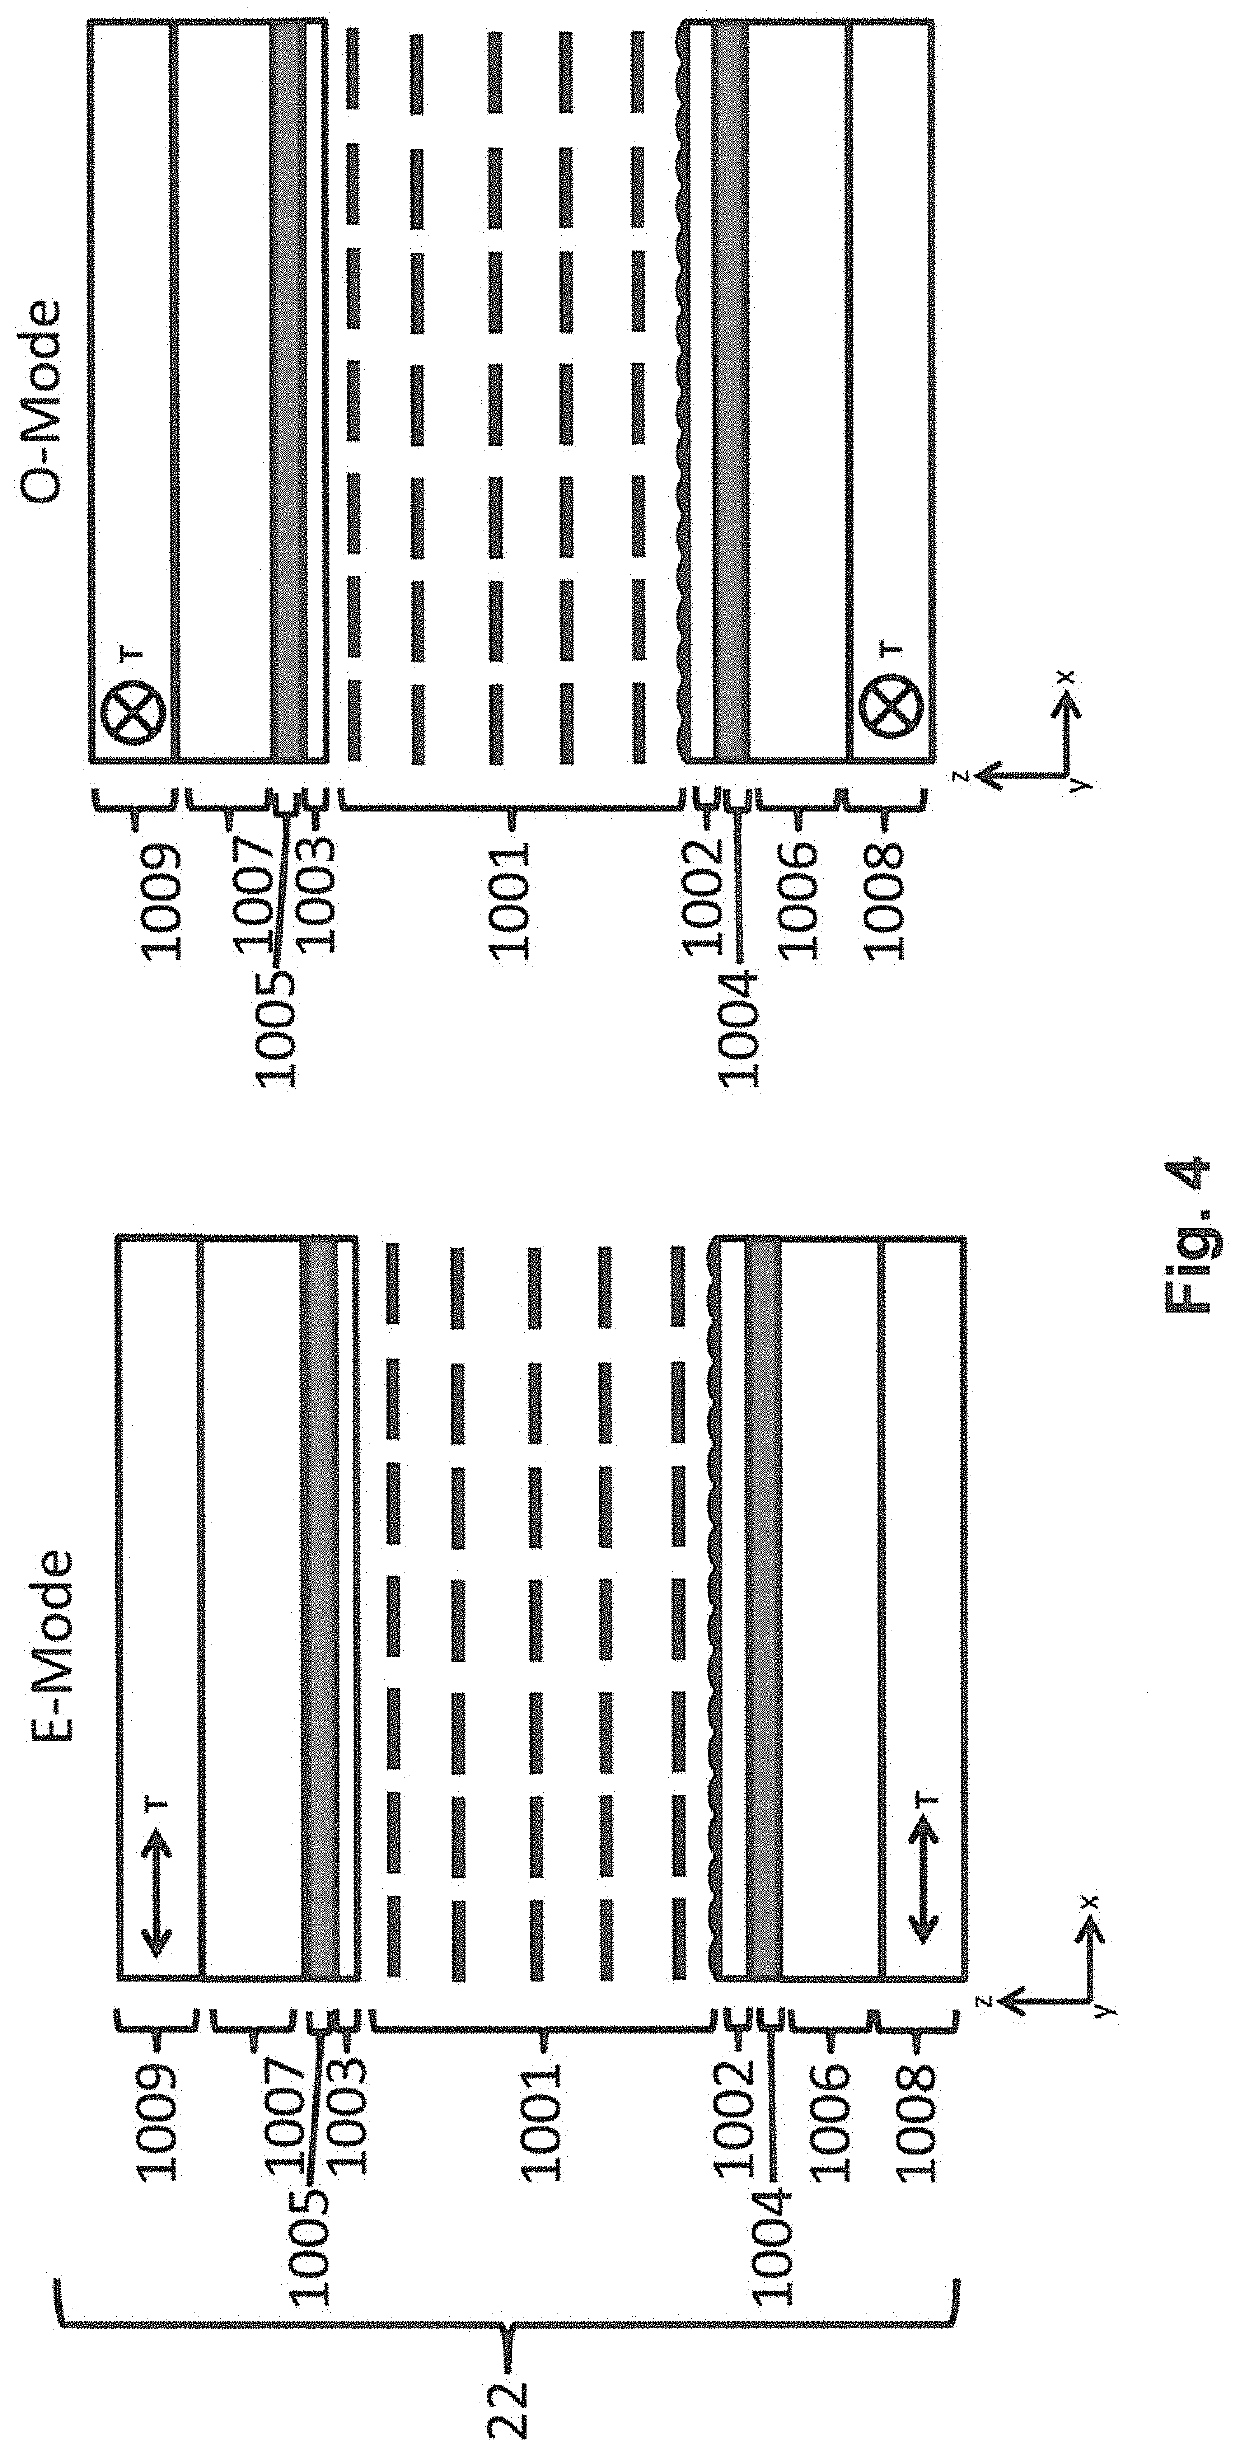 Bistable switchable liquid crystal private device